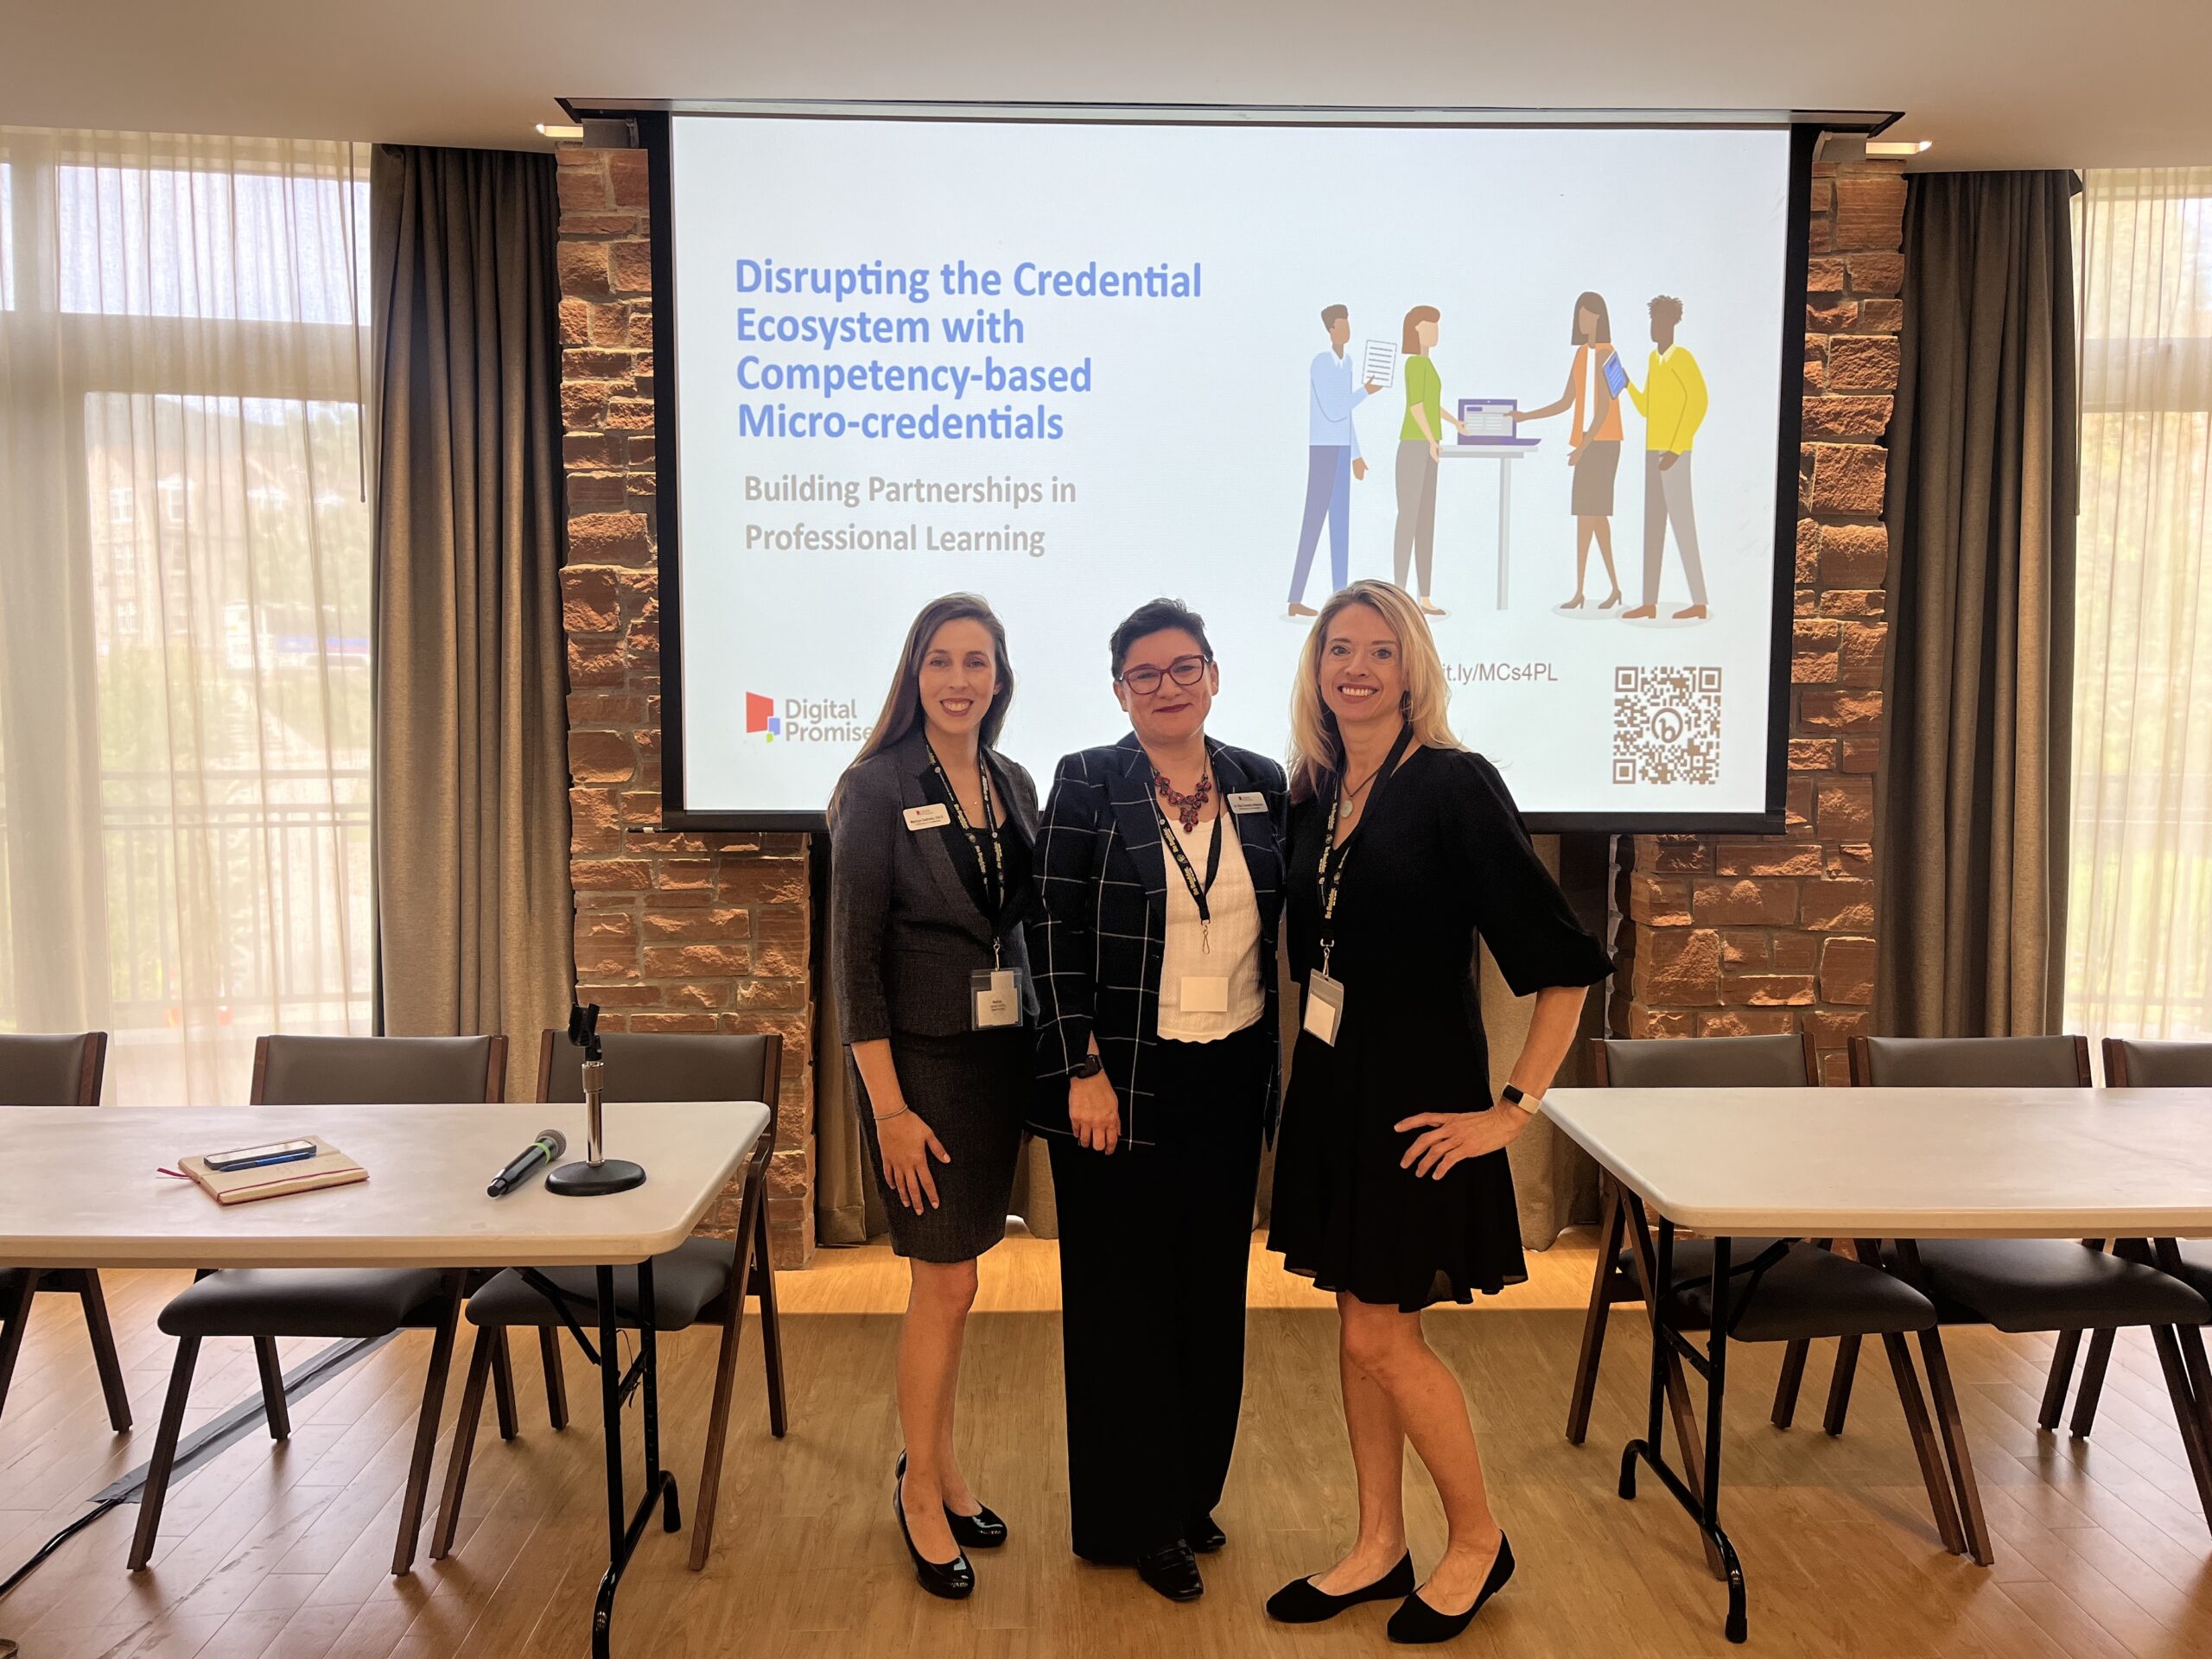 Marilys Galindo, Rita Fennelly-Atkinson, and Gina Conner during their session, “Disrupting the Credential Ecosystem with Competency-based Micro-credentials: Building Partnerships in Professional Learning.”